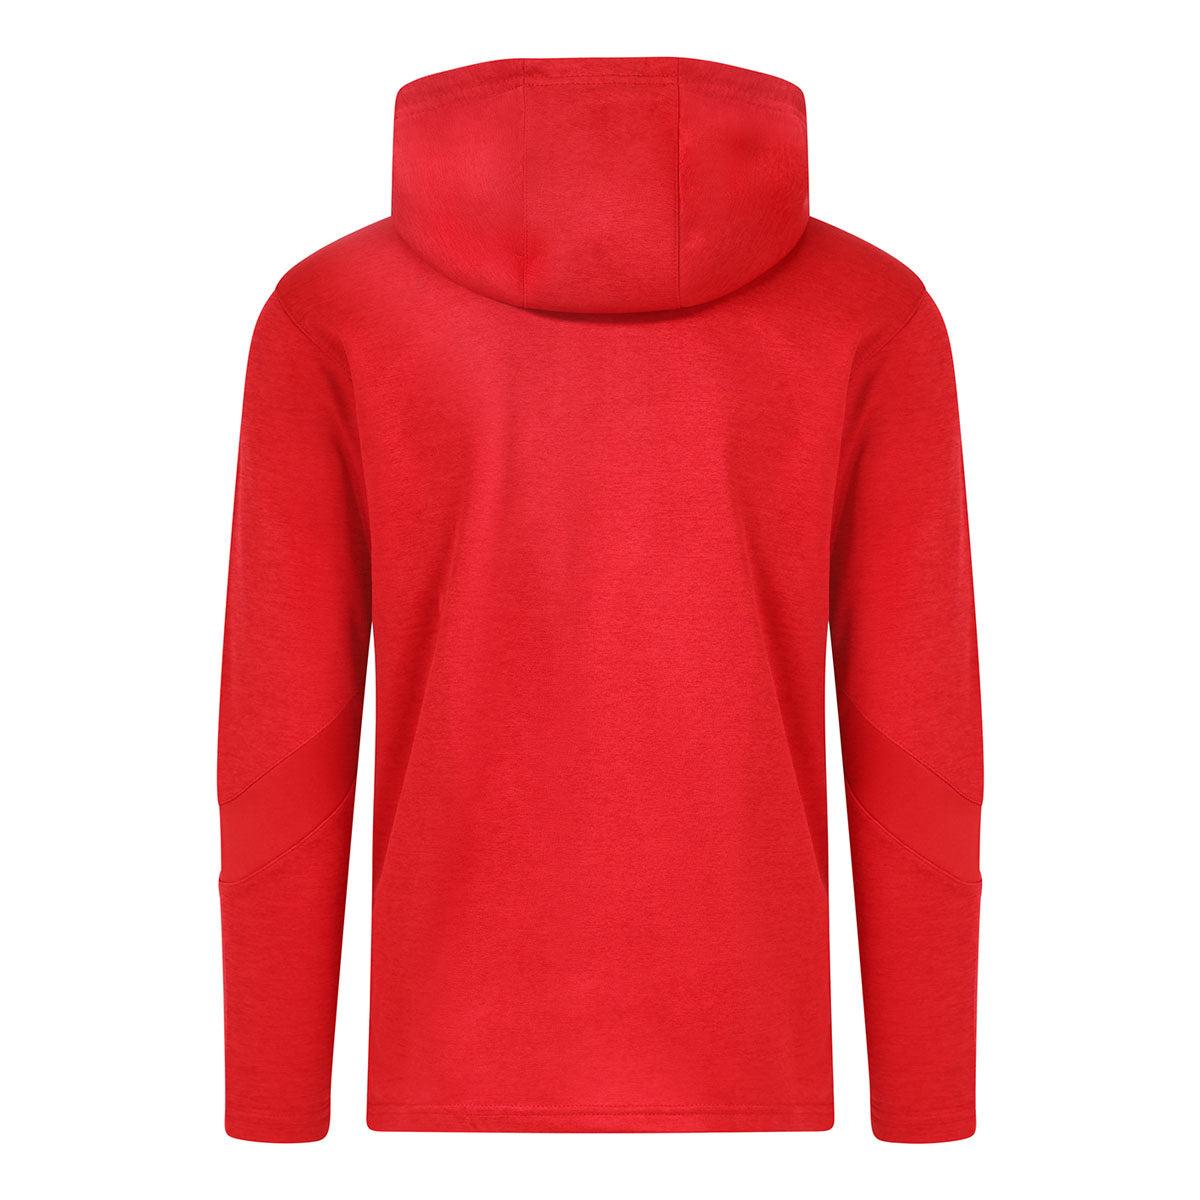 Mc Keever St Michael's Magheralin Core 22 1/4 Zip Hoodie - Youth - Red